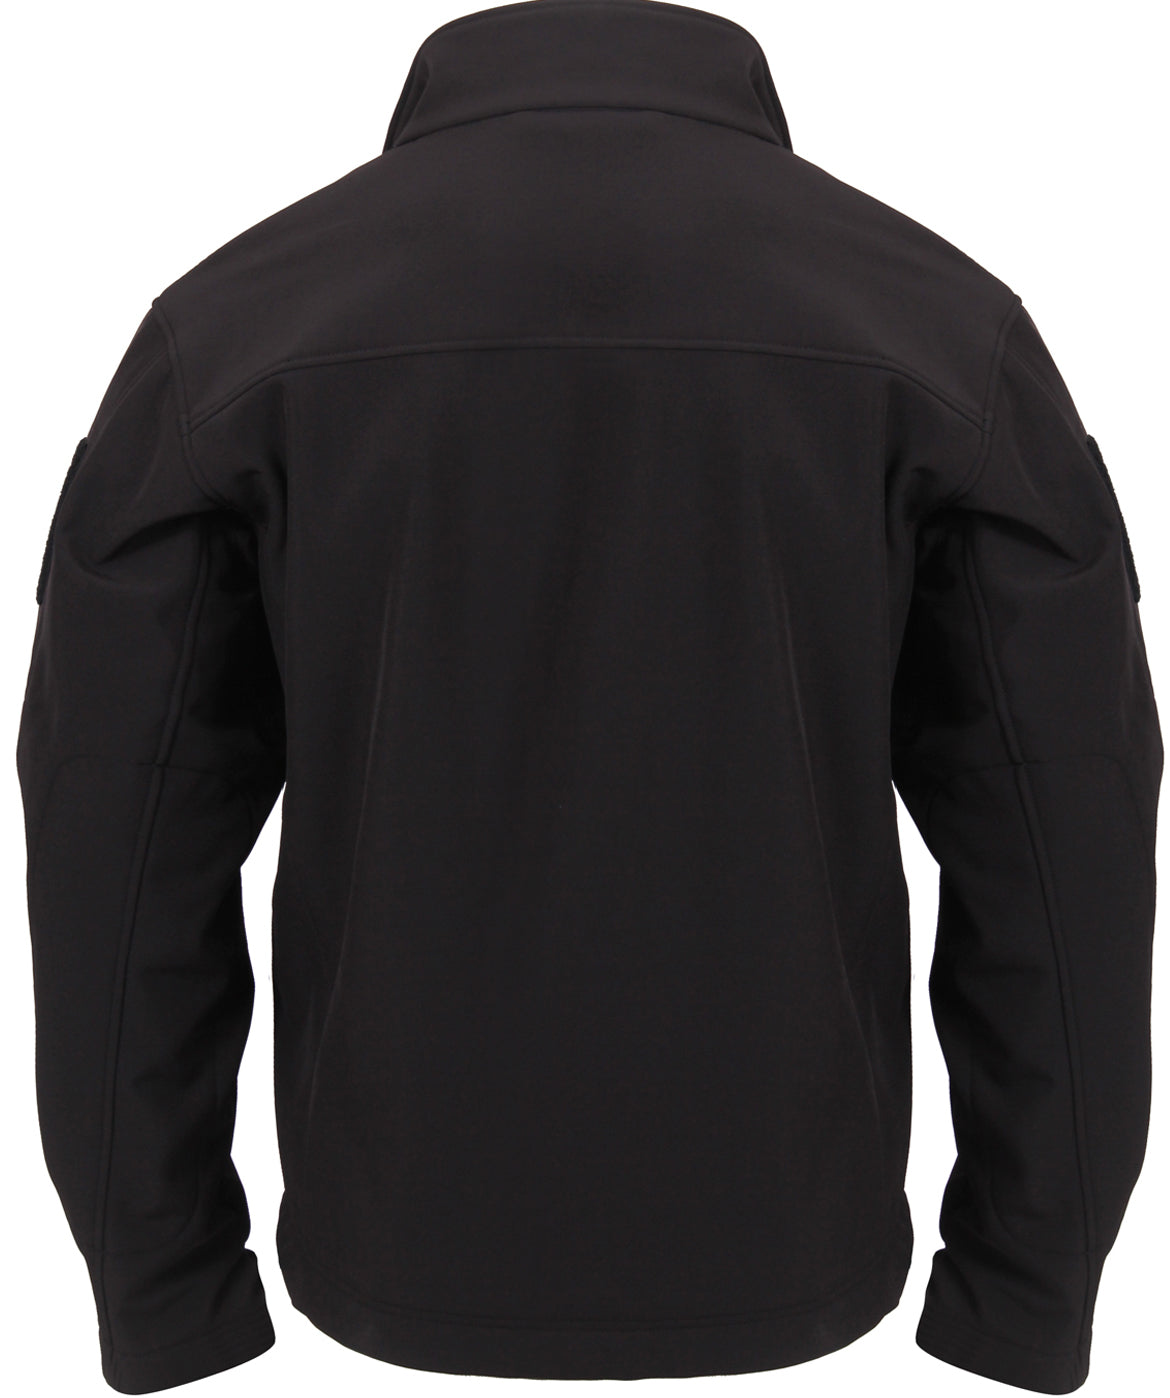 Black Stealth Ops Soft Shell Tactical Jacket - Galaxy Army Navy